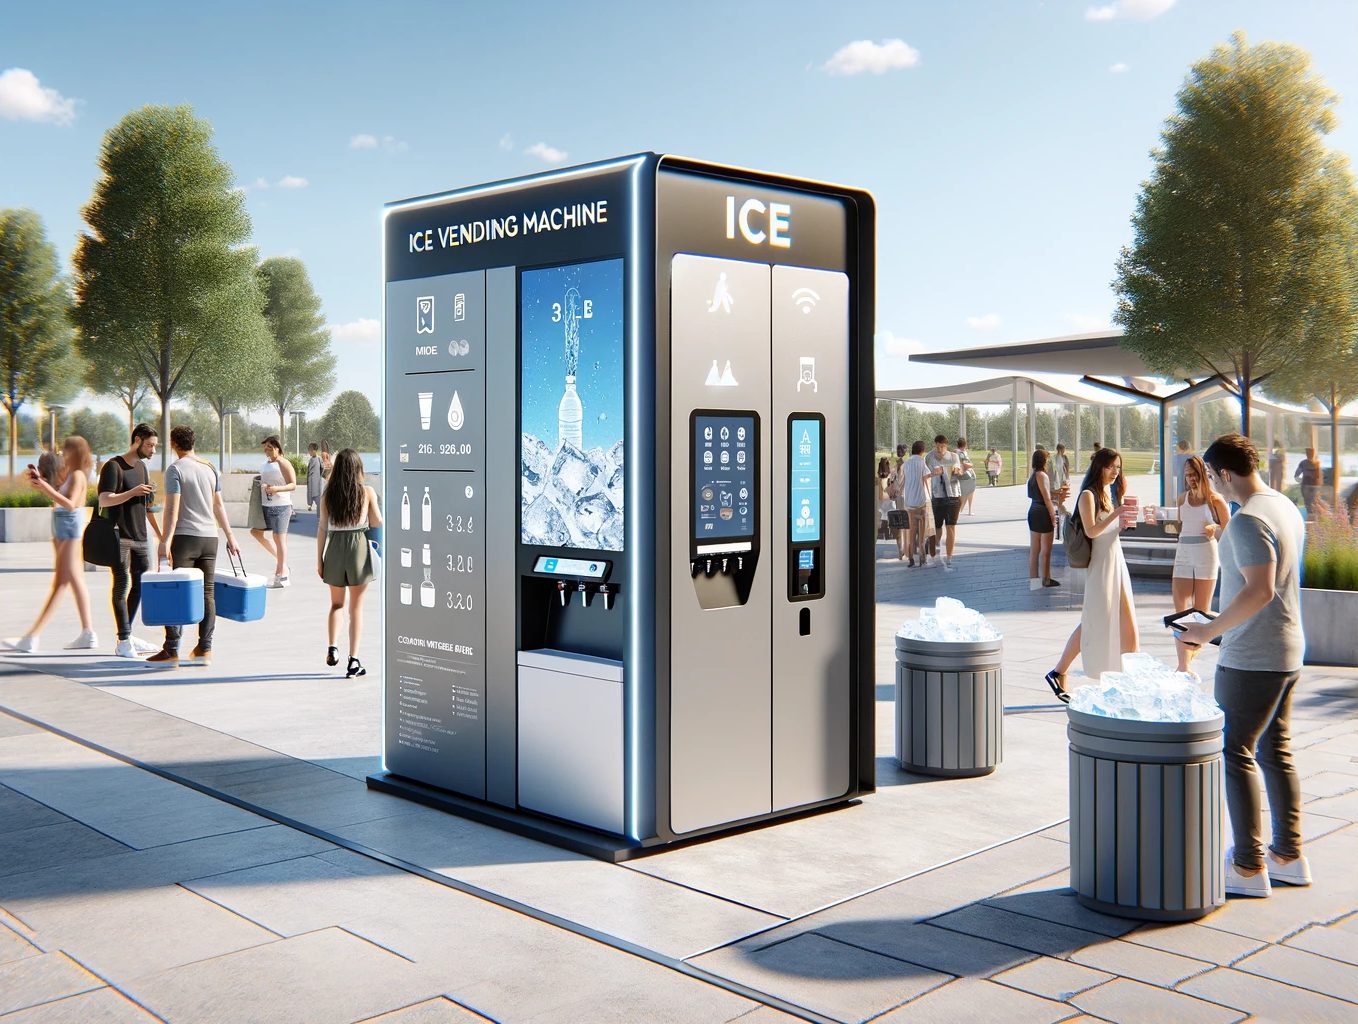 A modern ice vending machine in a high-traffic outdoor location